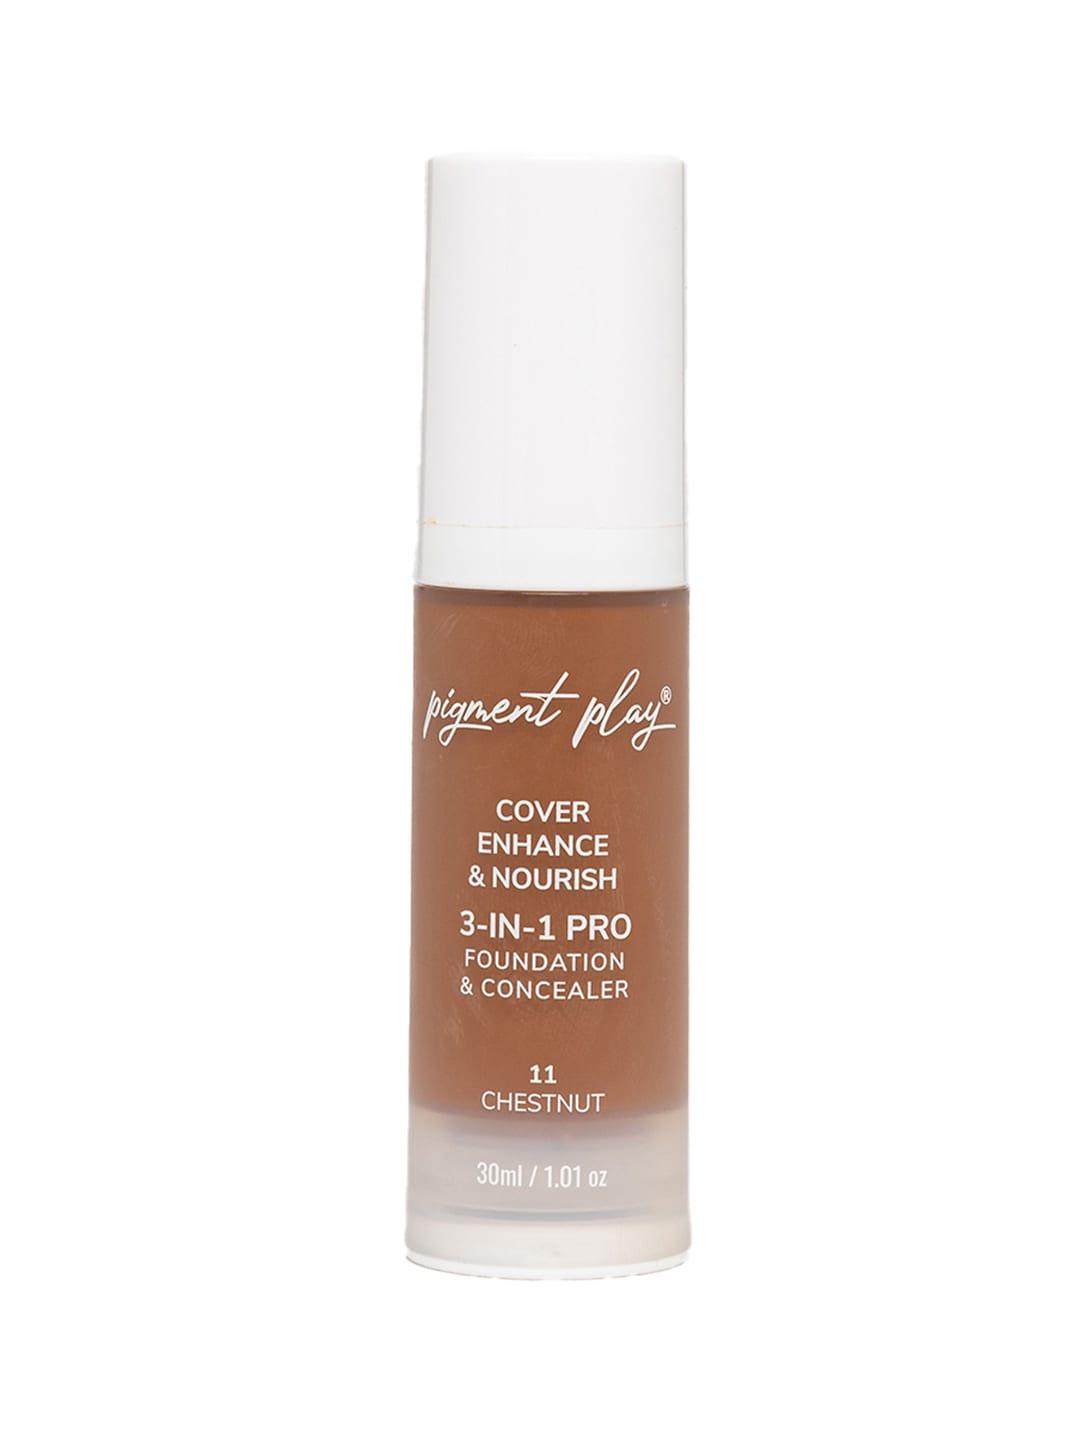 pigment play cover enhance & nourish 3-in-1 pro foundation & concealer 30ml - chestnut 11